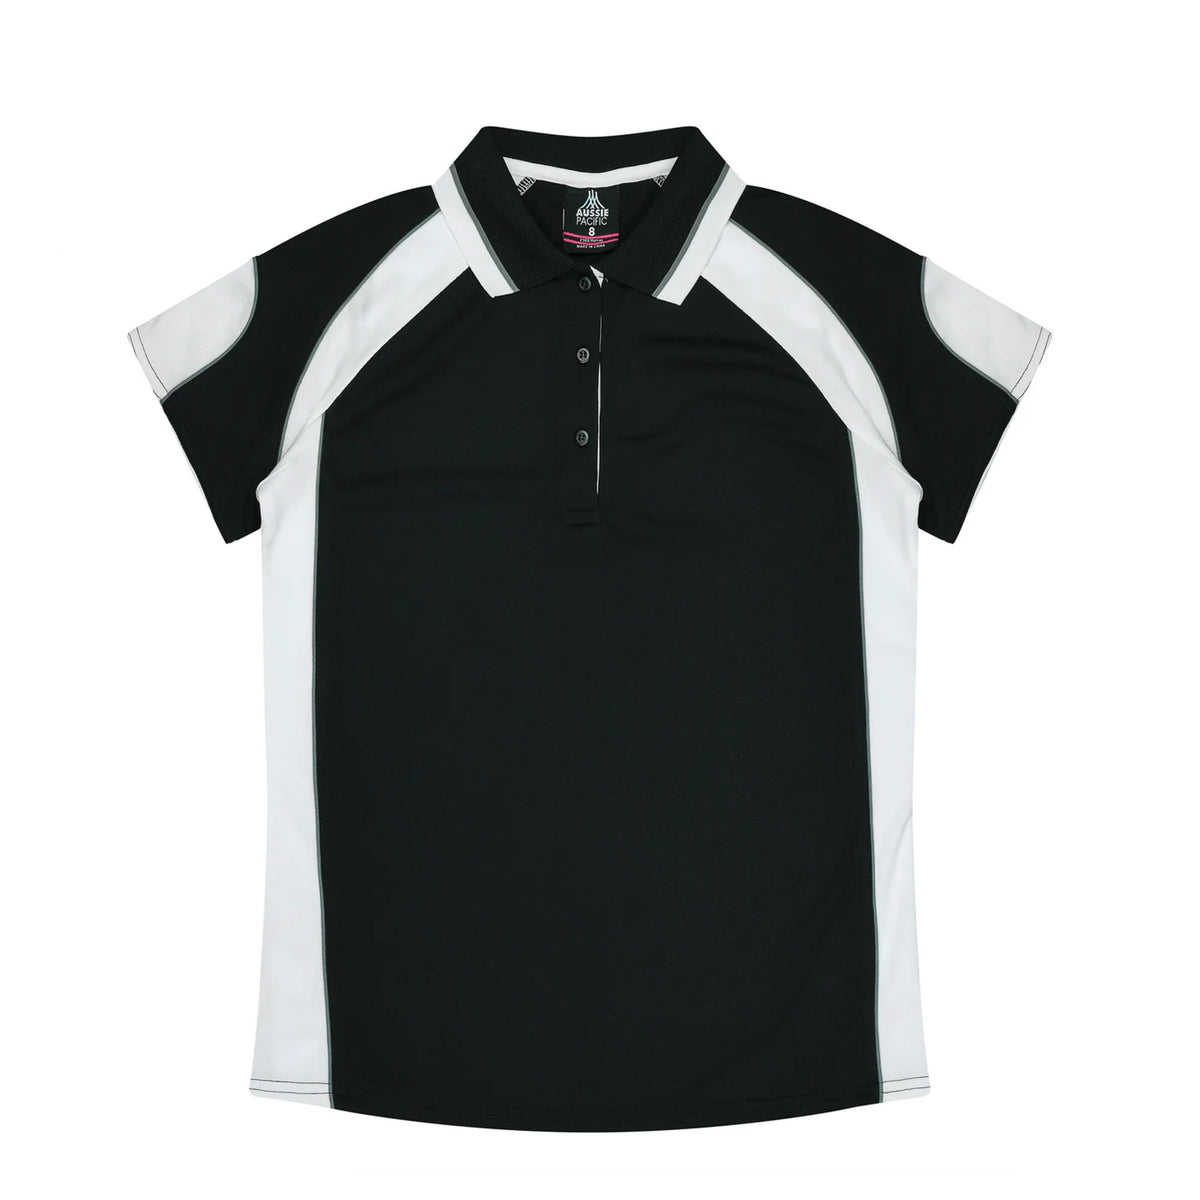 aussie pacific murray ladies polo in black white